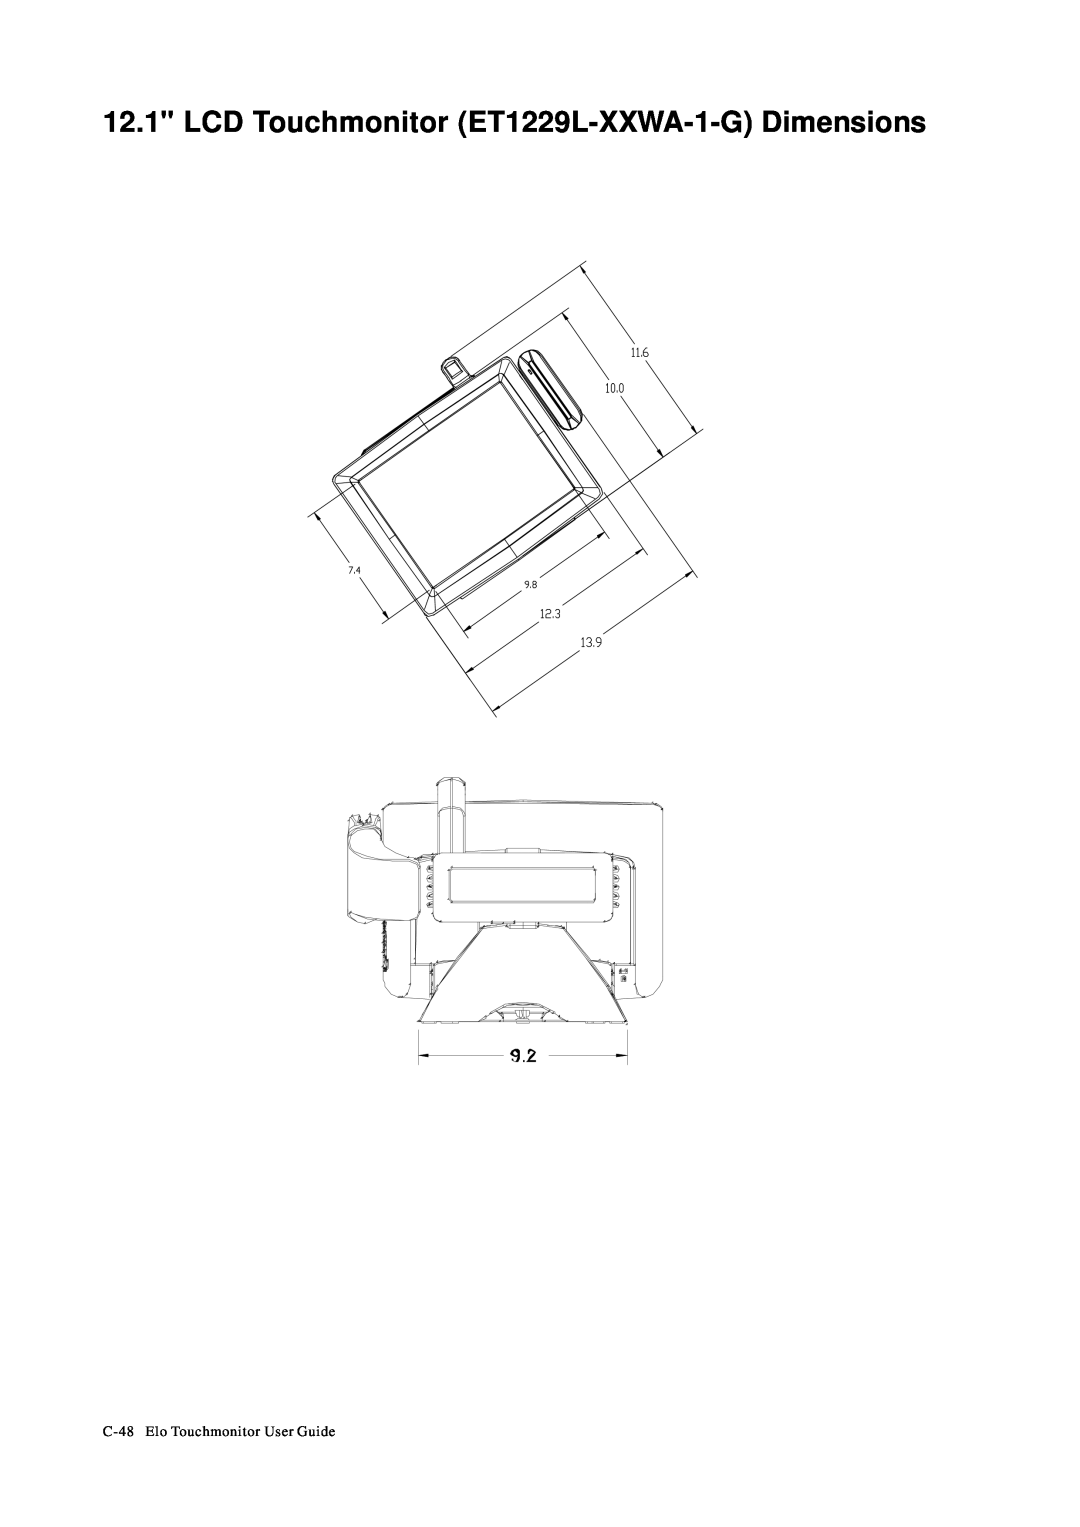 Tyco Electronics manual LCD Touchmonitor ET1229L-XXWA-1-G Dimensions, C-48 Elo Touchmonitor User Guide 